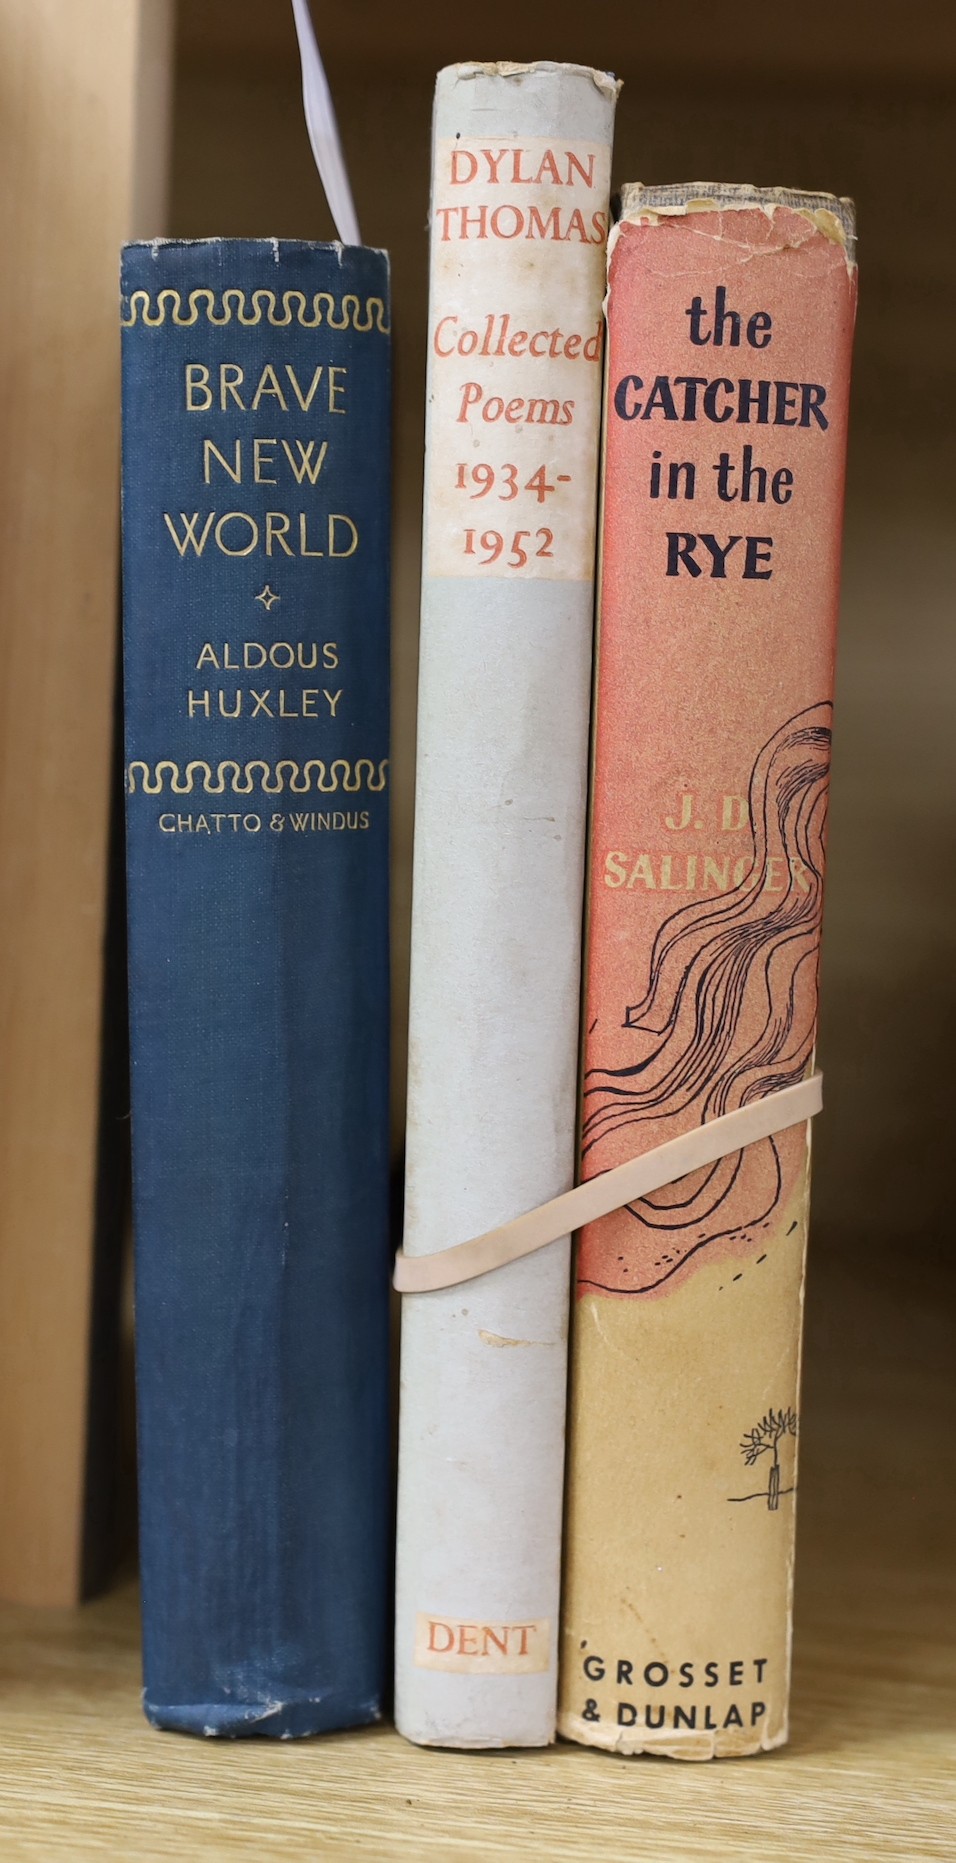 Huxley, Aldous Brave New World, 1st edition, 8vo, original publishers blue cloth, Chatto and Windus, 1932; Thomas, Dylan - Collected Poems, in d/j, London 1956 and Salinger, J. D - The Catcher in the Rye, printed from th